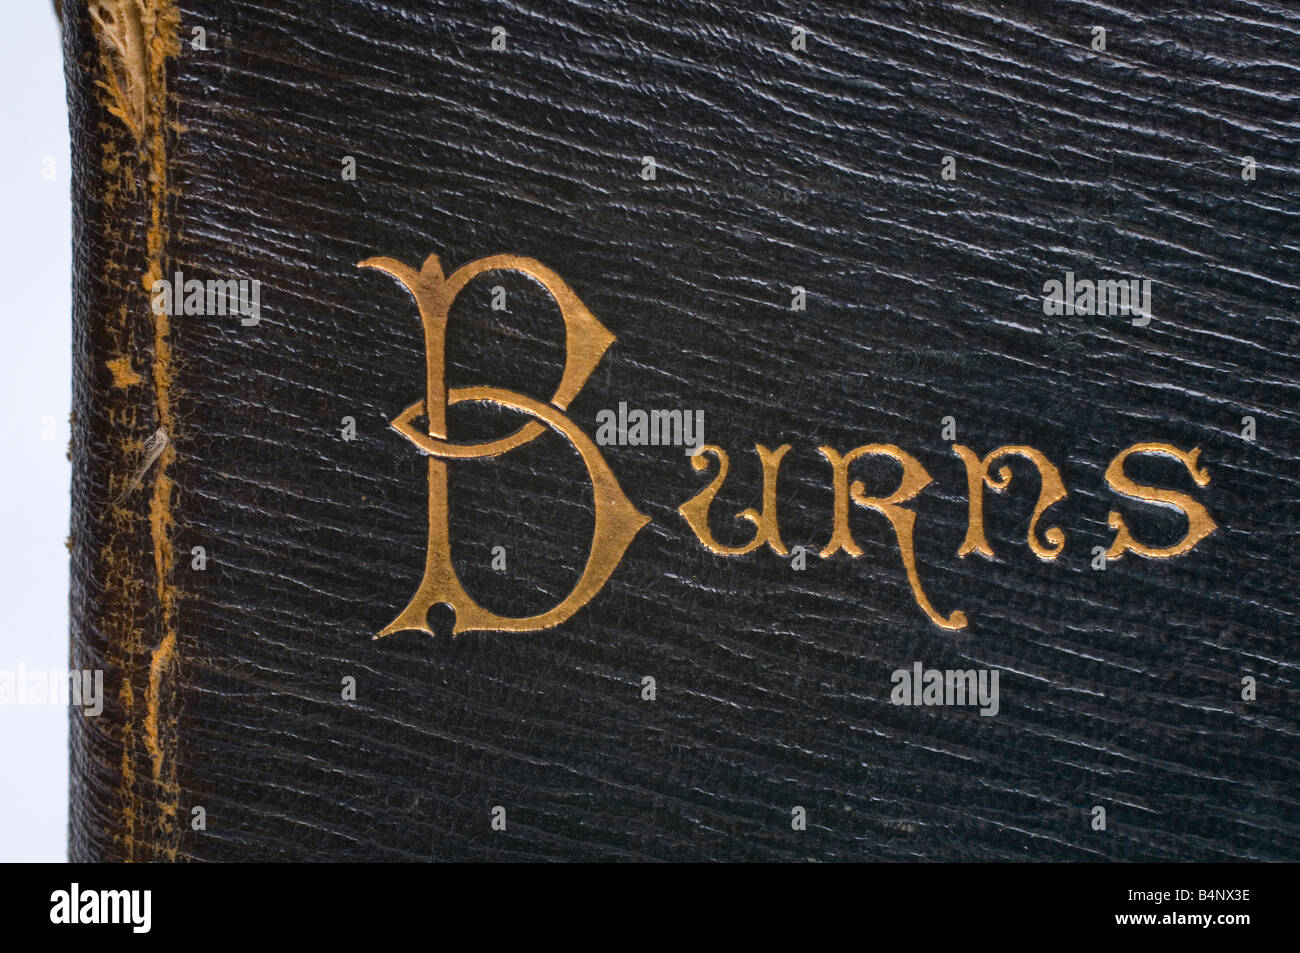 The name of the author Robbie Burns engraved in gold on the leather binding of an old book of his works Stock Photo